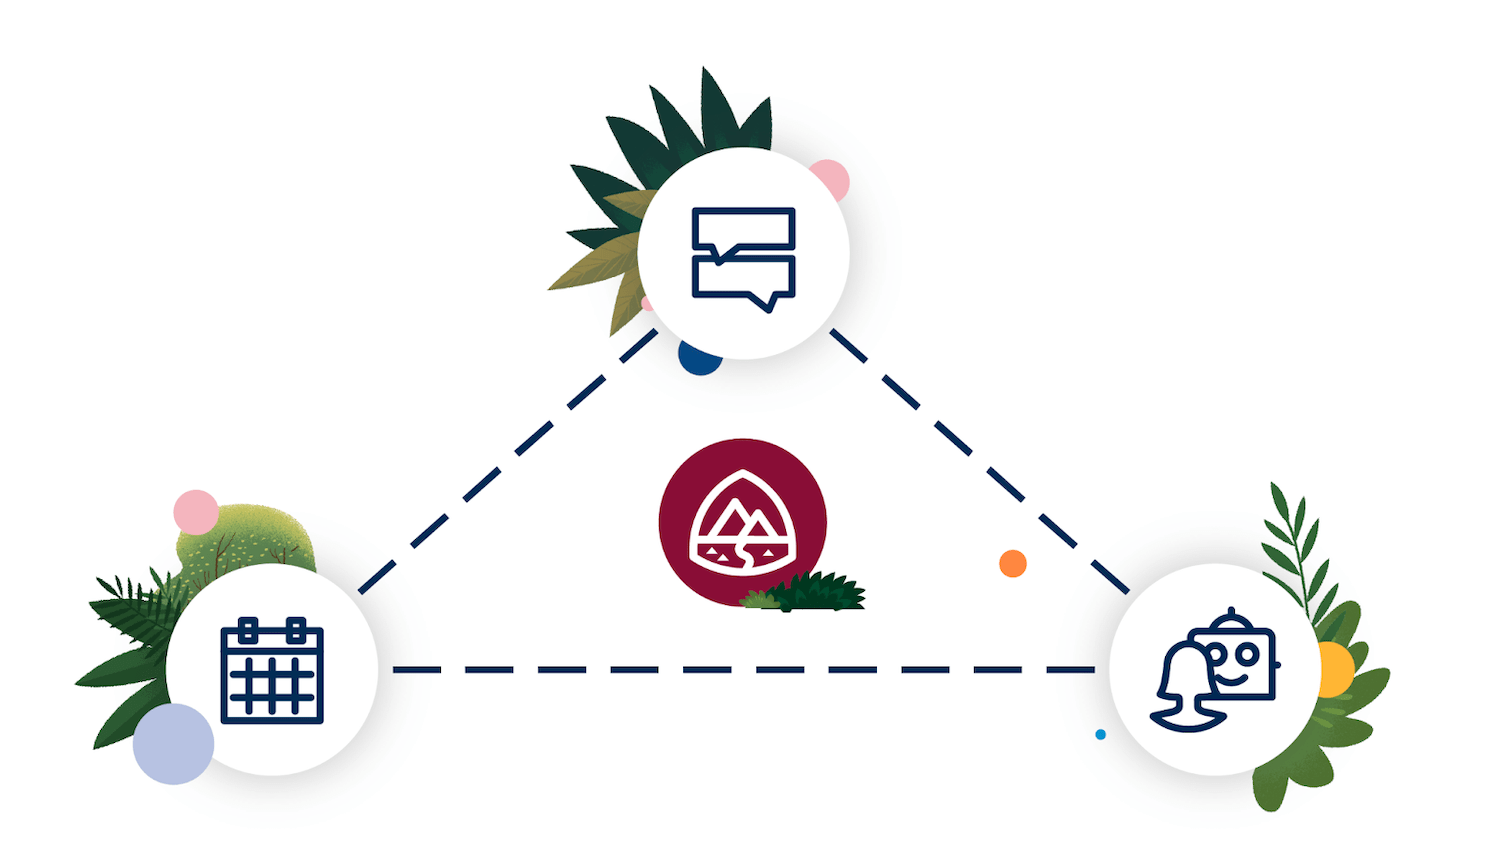 Illustration of a triangle with symbols for work, capacity plan, and experts at each point, and a symbol for skills in the center.